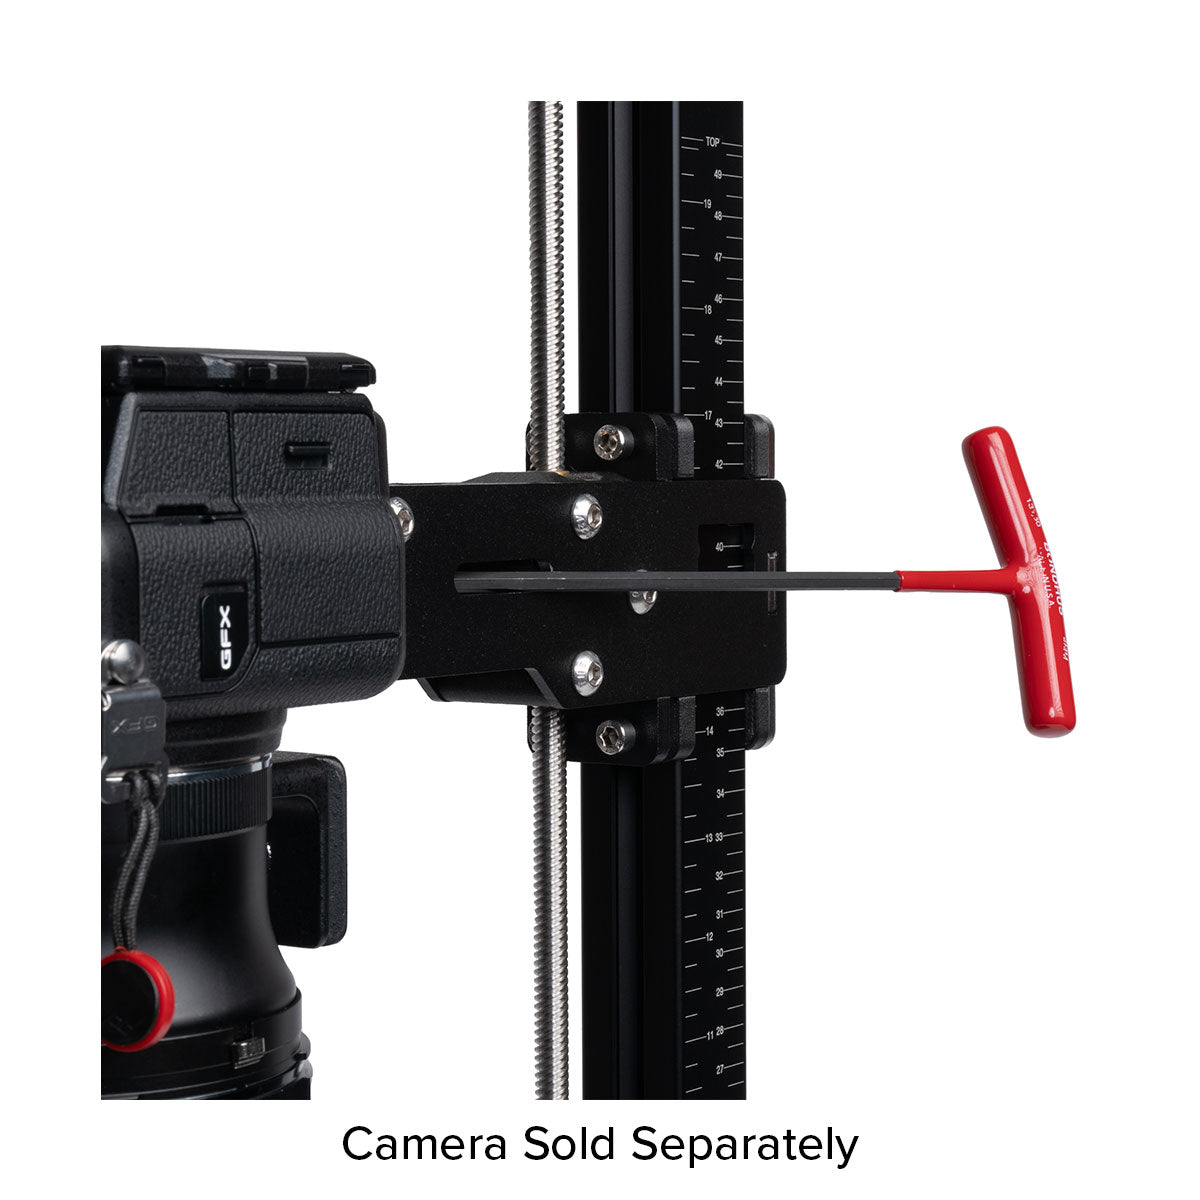 Negative Supply Curated Kit for 35mm and 120 Film Scanning (with Pro Riser MK3)